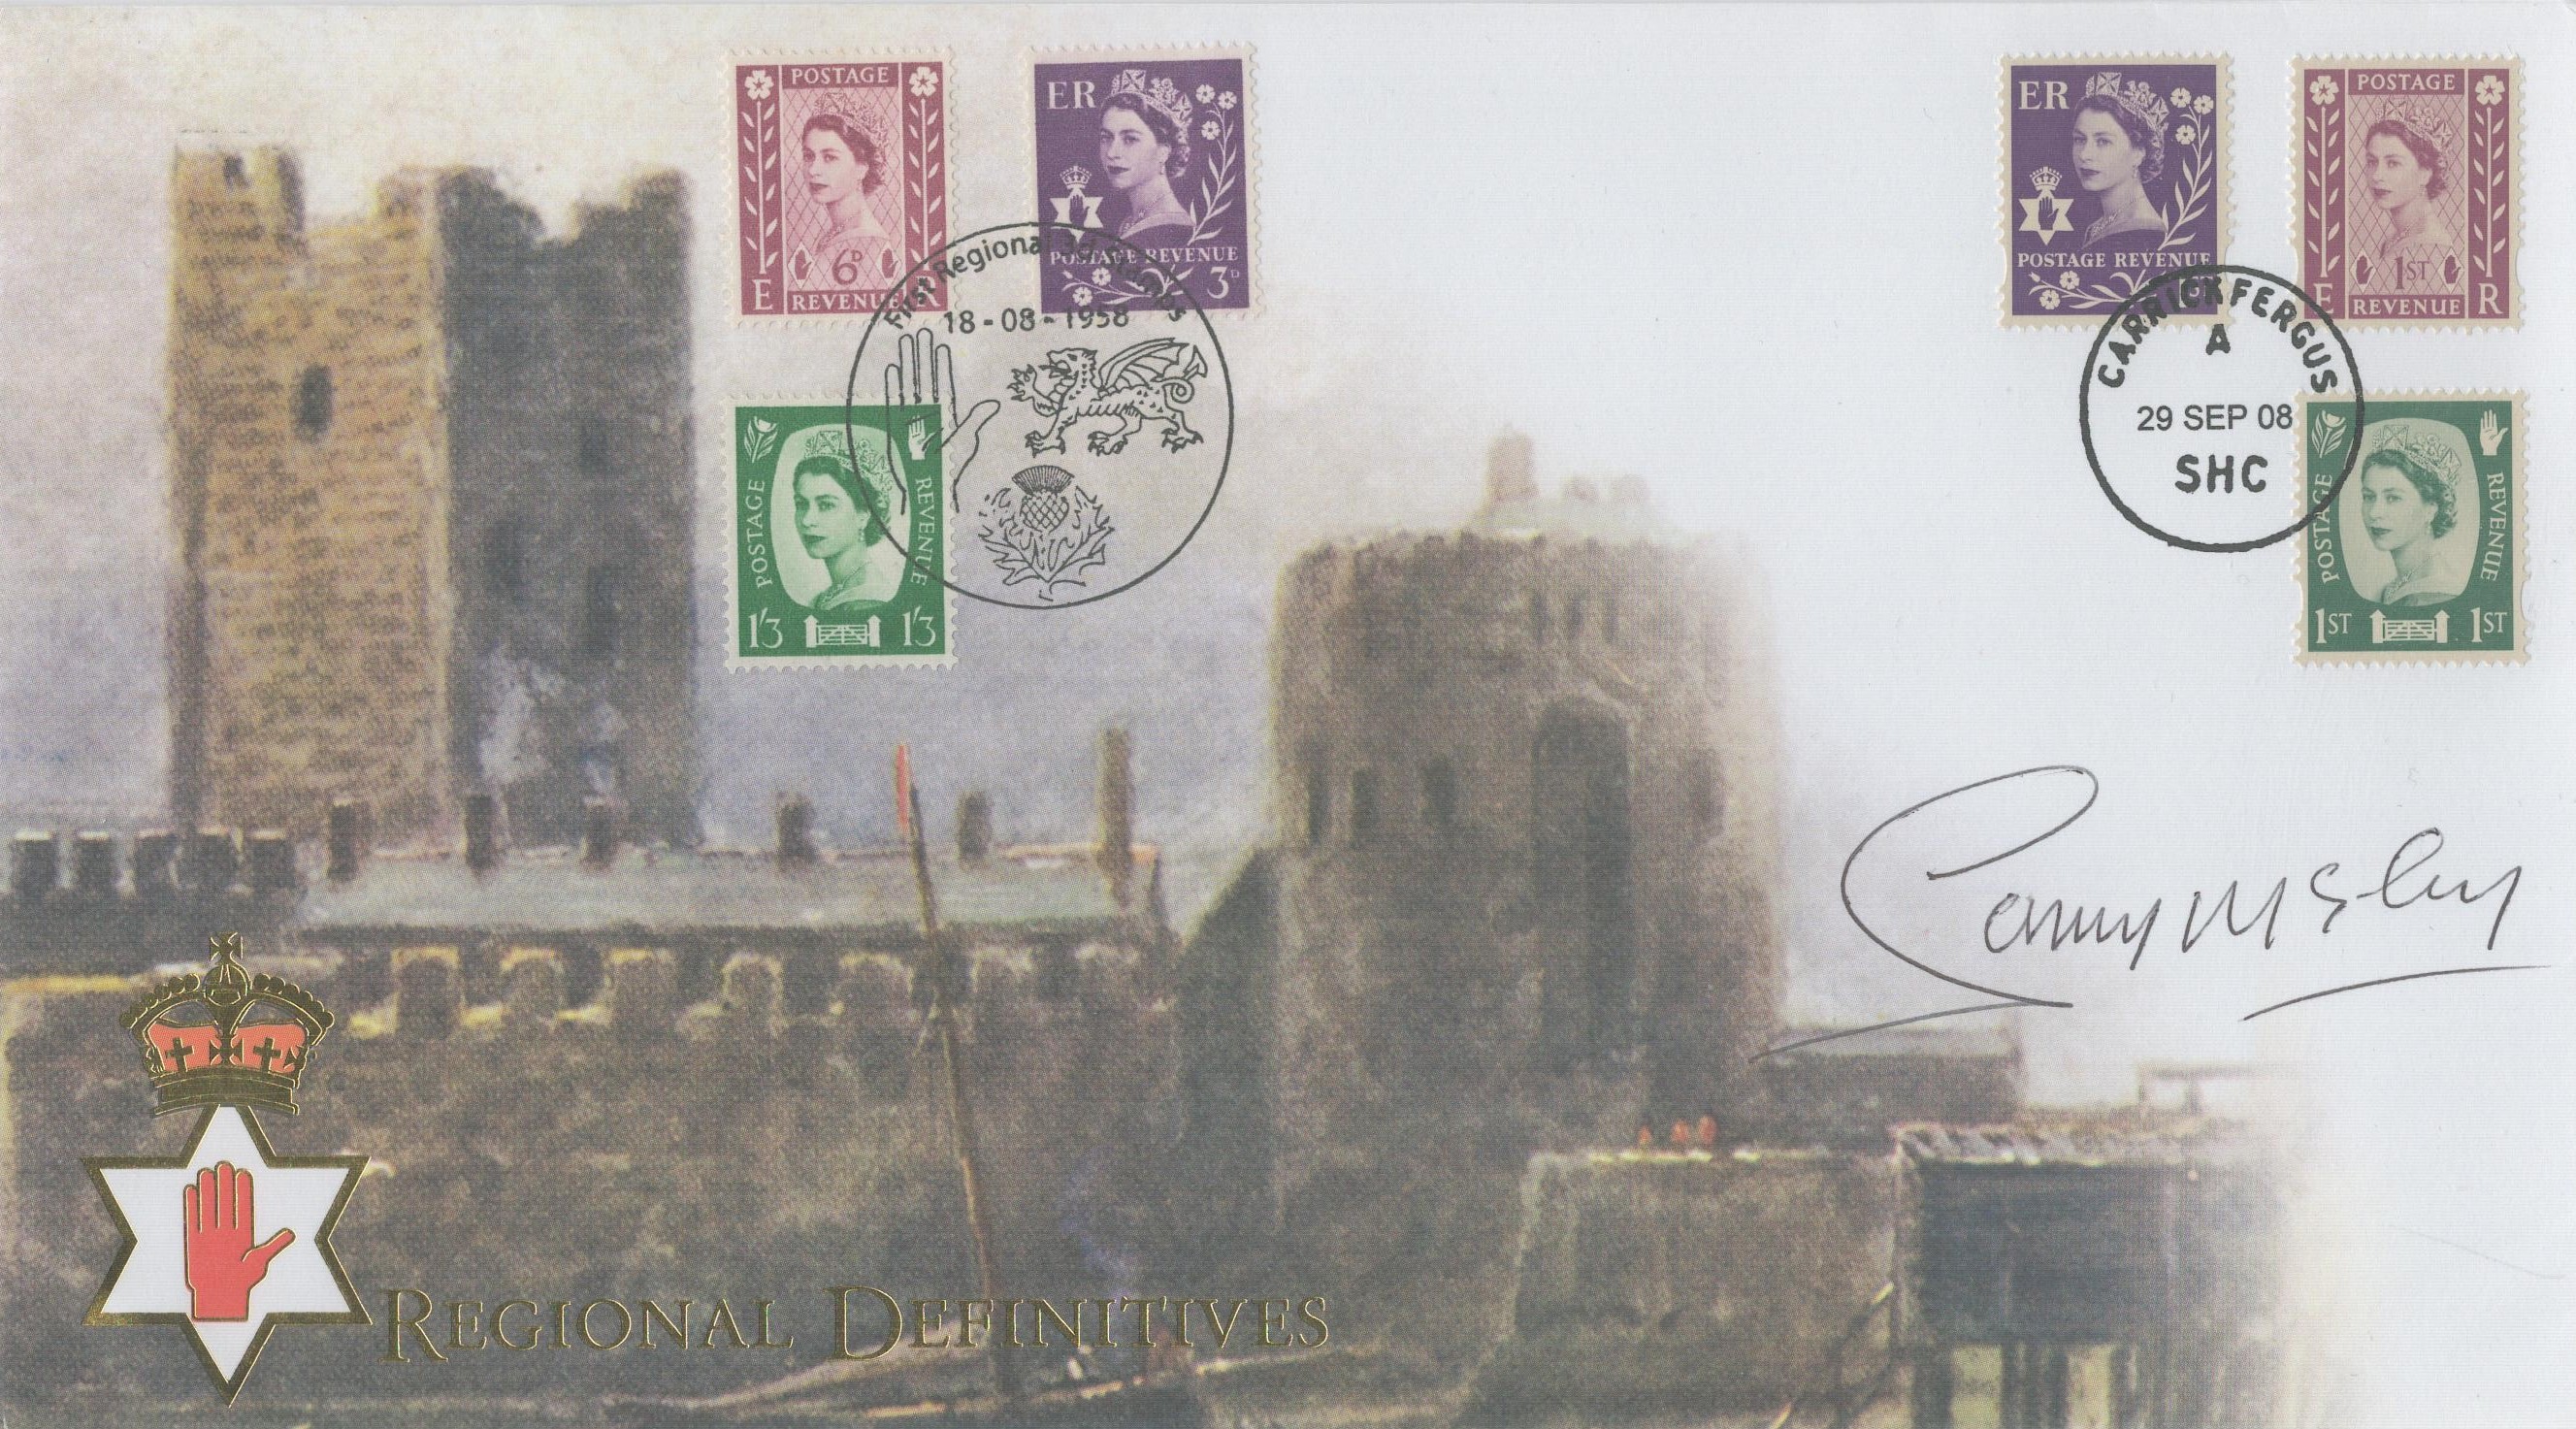 Sammy McIlroy signed Regional Definitives FDC. 6 Stamps and 2 Postmarks - 18/08/1958 and 29 Sep